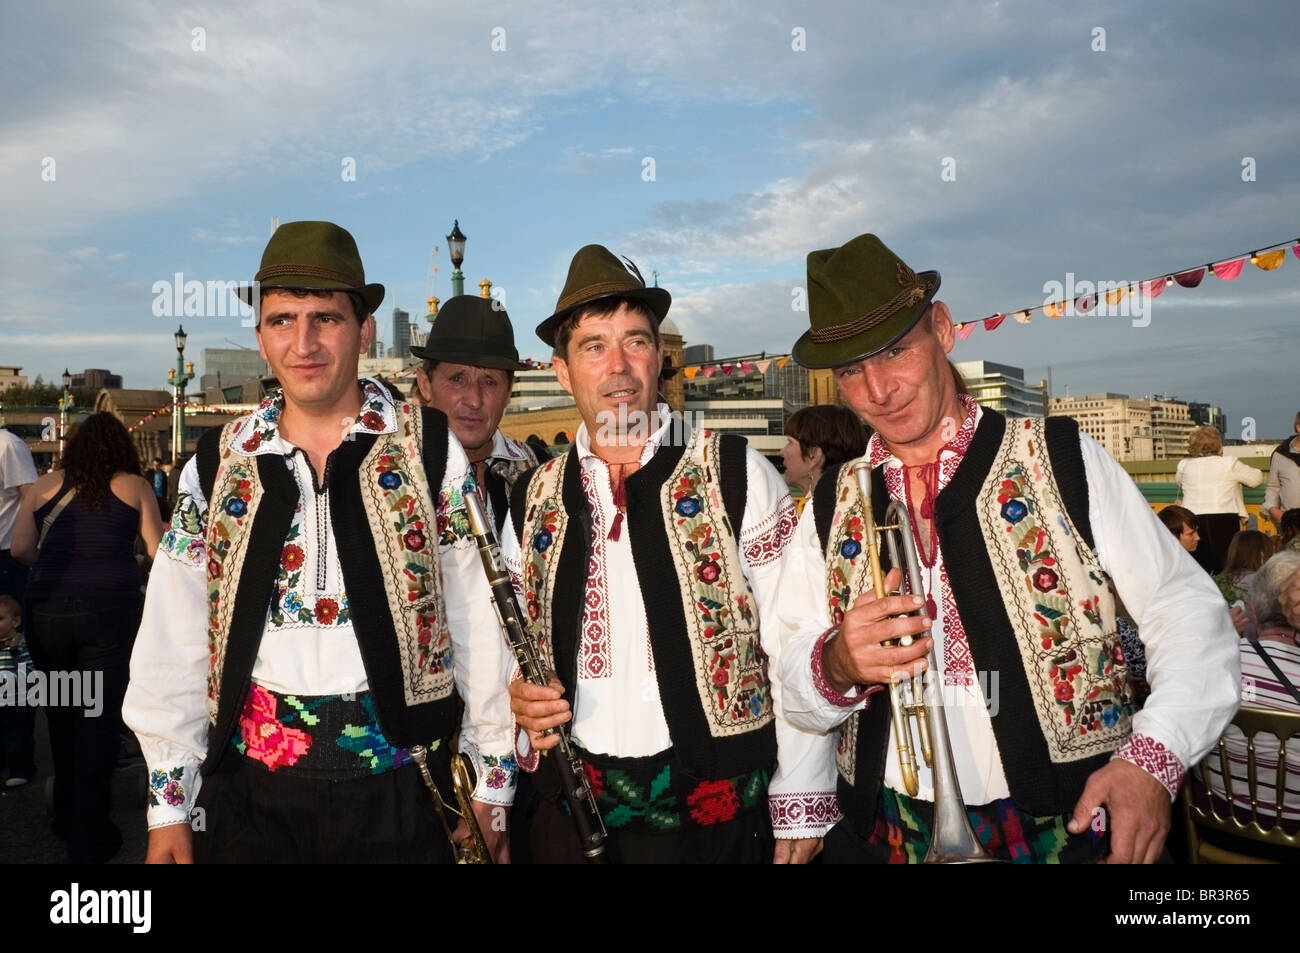 Romanian men in cultural ethnographic outfits, band players at Mayor Thames Festival, Southwark Bridge, London, England, UK Stock Photo